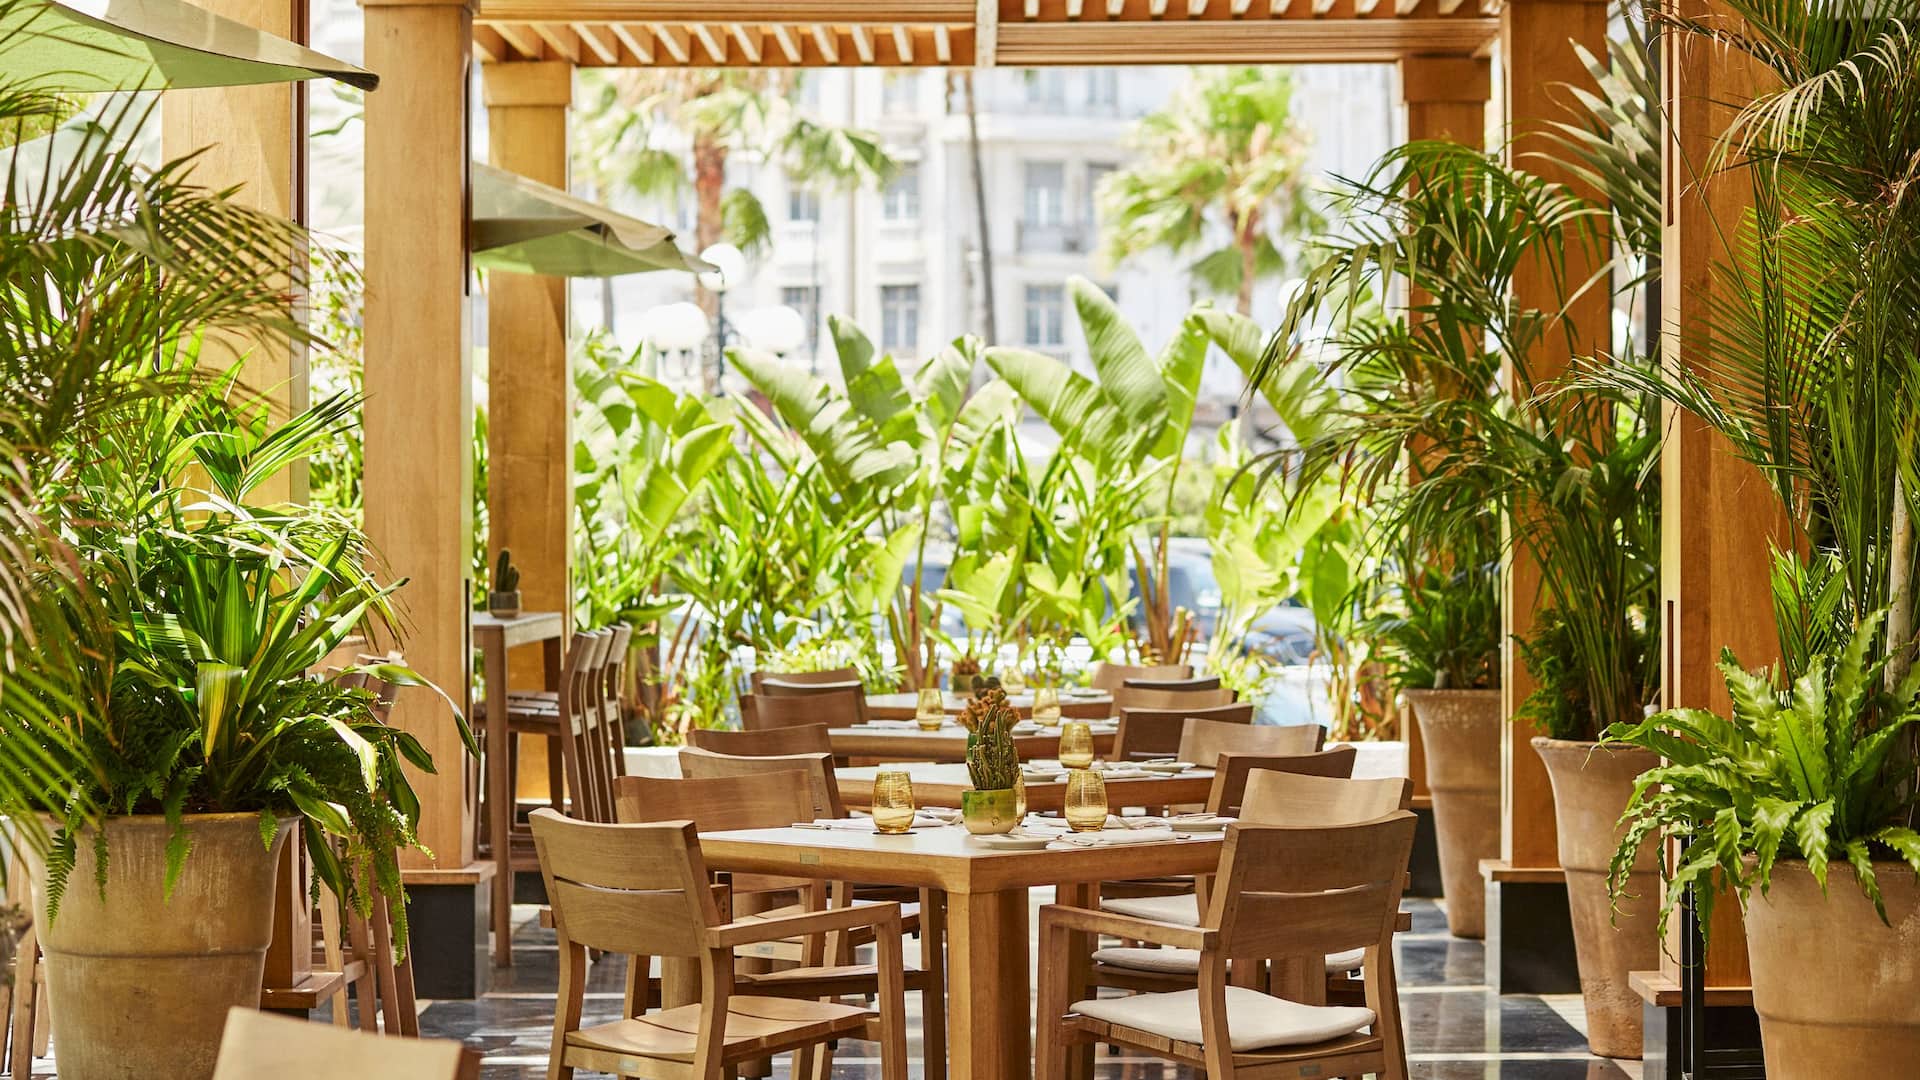 Restaurant tables and chairs on covered patio 